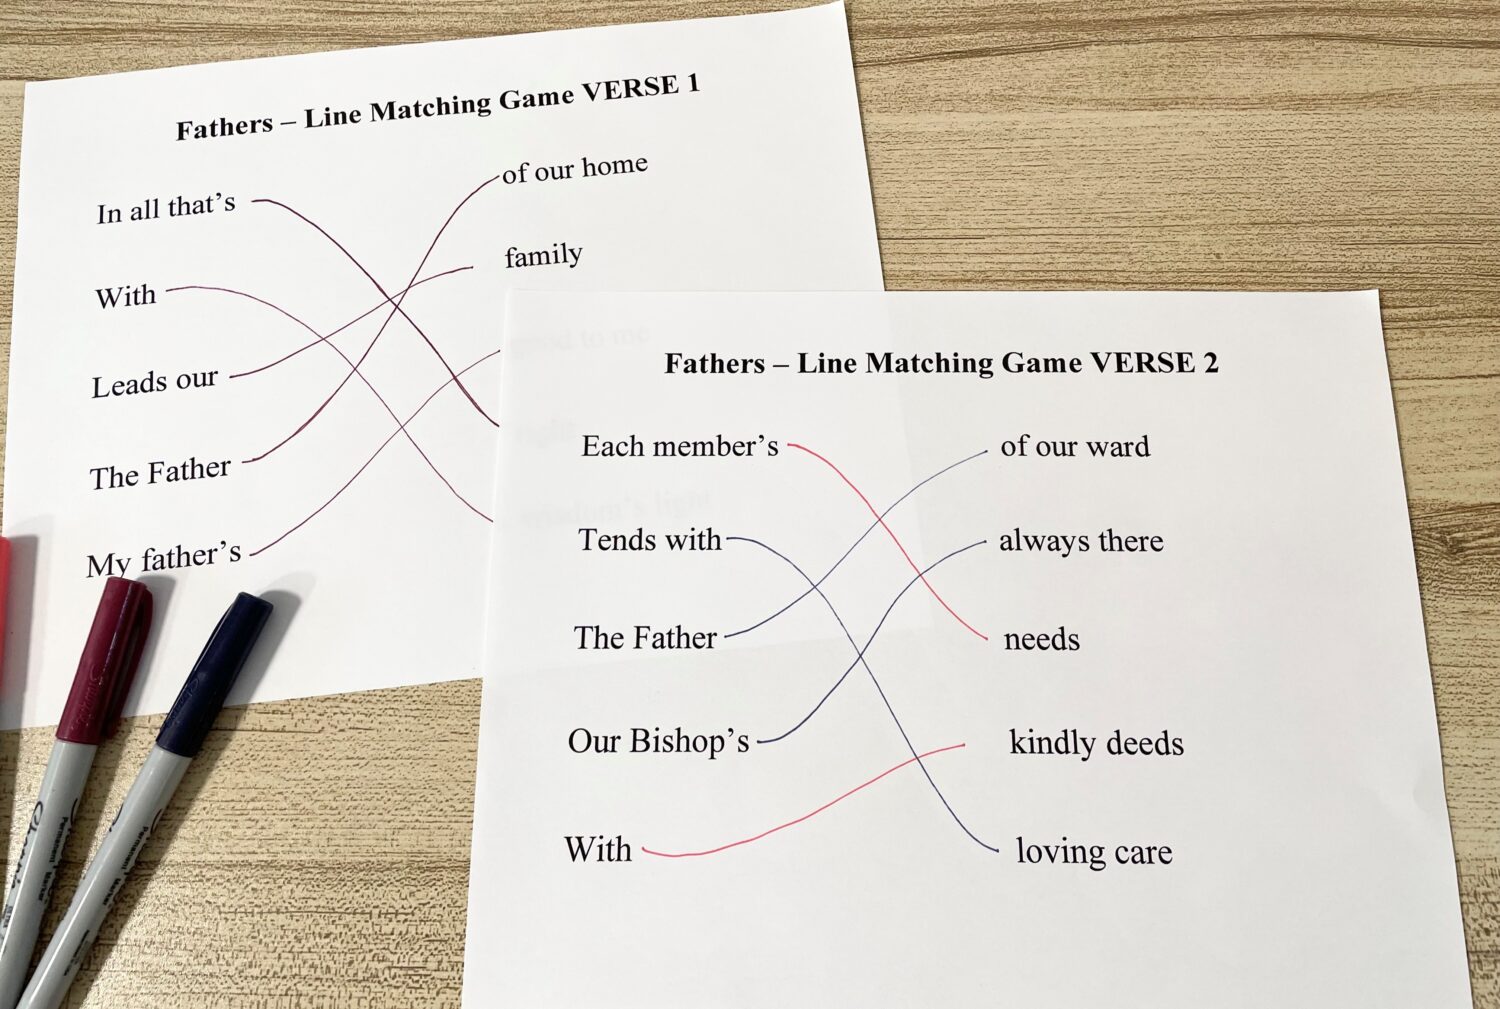 Fathers Line Matching Game Easy singing time ideas for Primary Music Leaders IMG 6609 e1654279811886